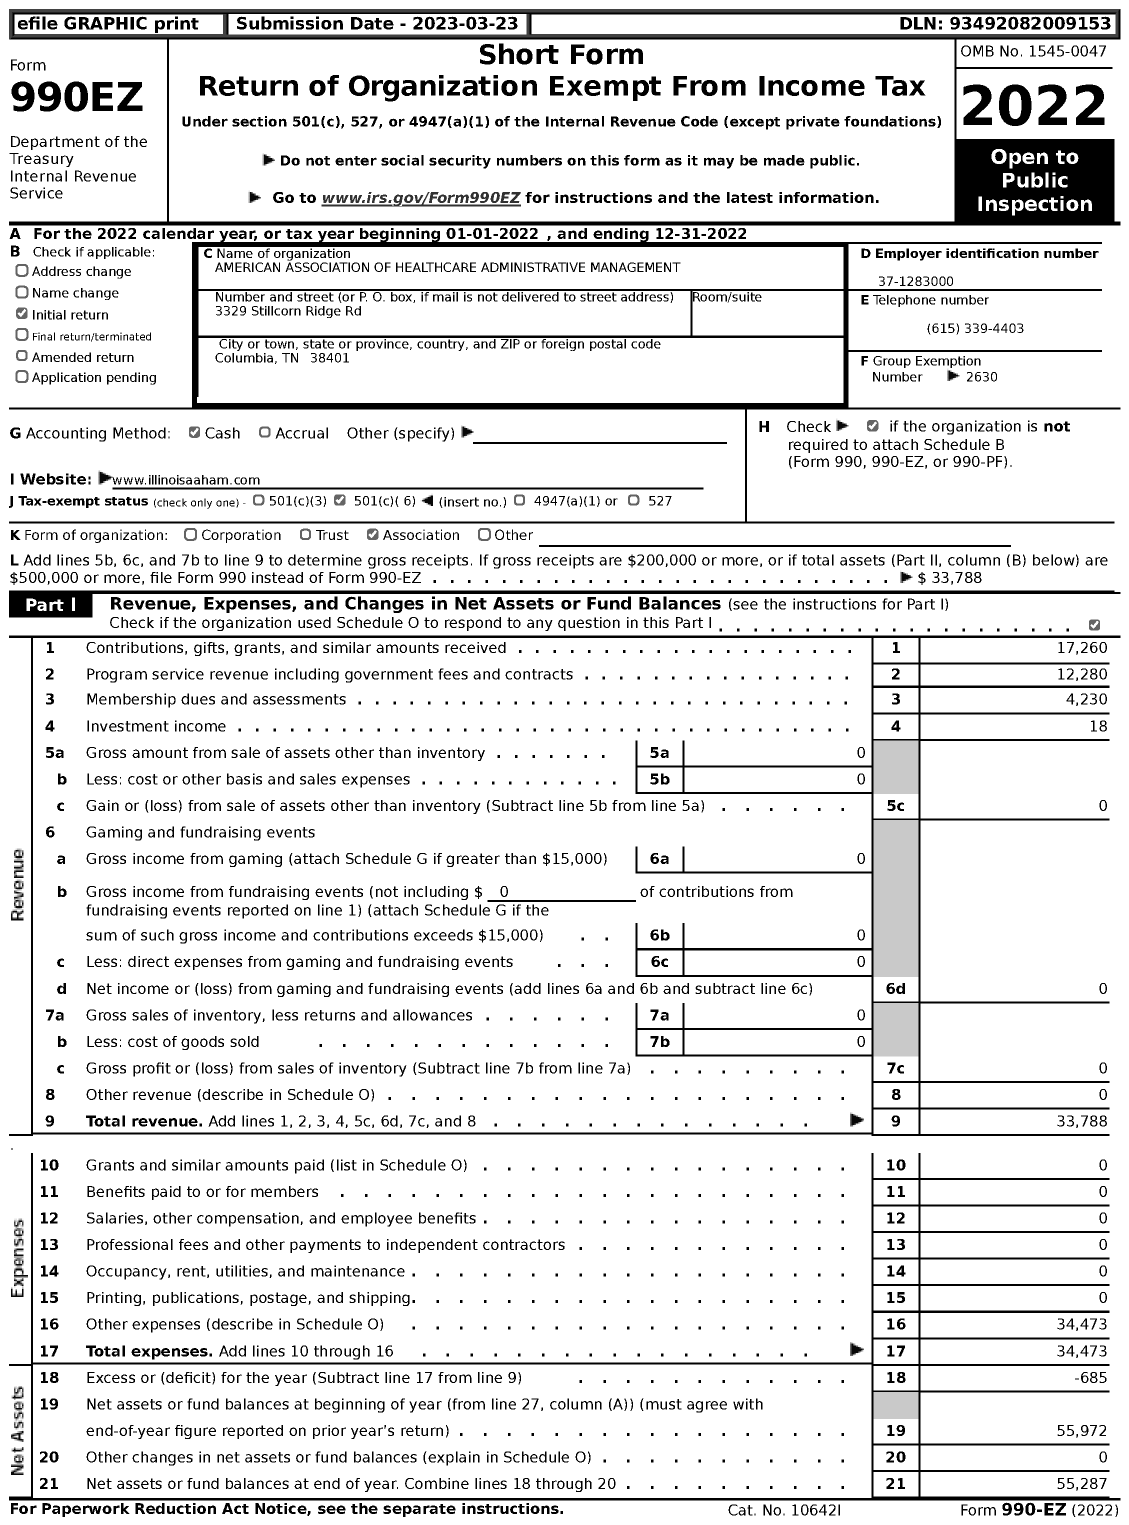 Image of first page of 2022 Form 990EZ for AMERICAN ASSOCIATION OF HEALTHCARE ADMINISTRATIVE MANAGEMENT - 9 Illinois Chapter